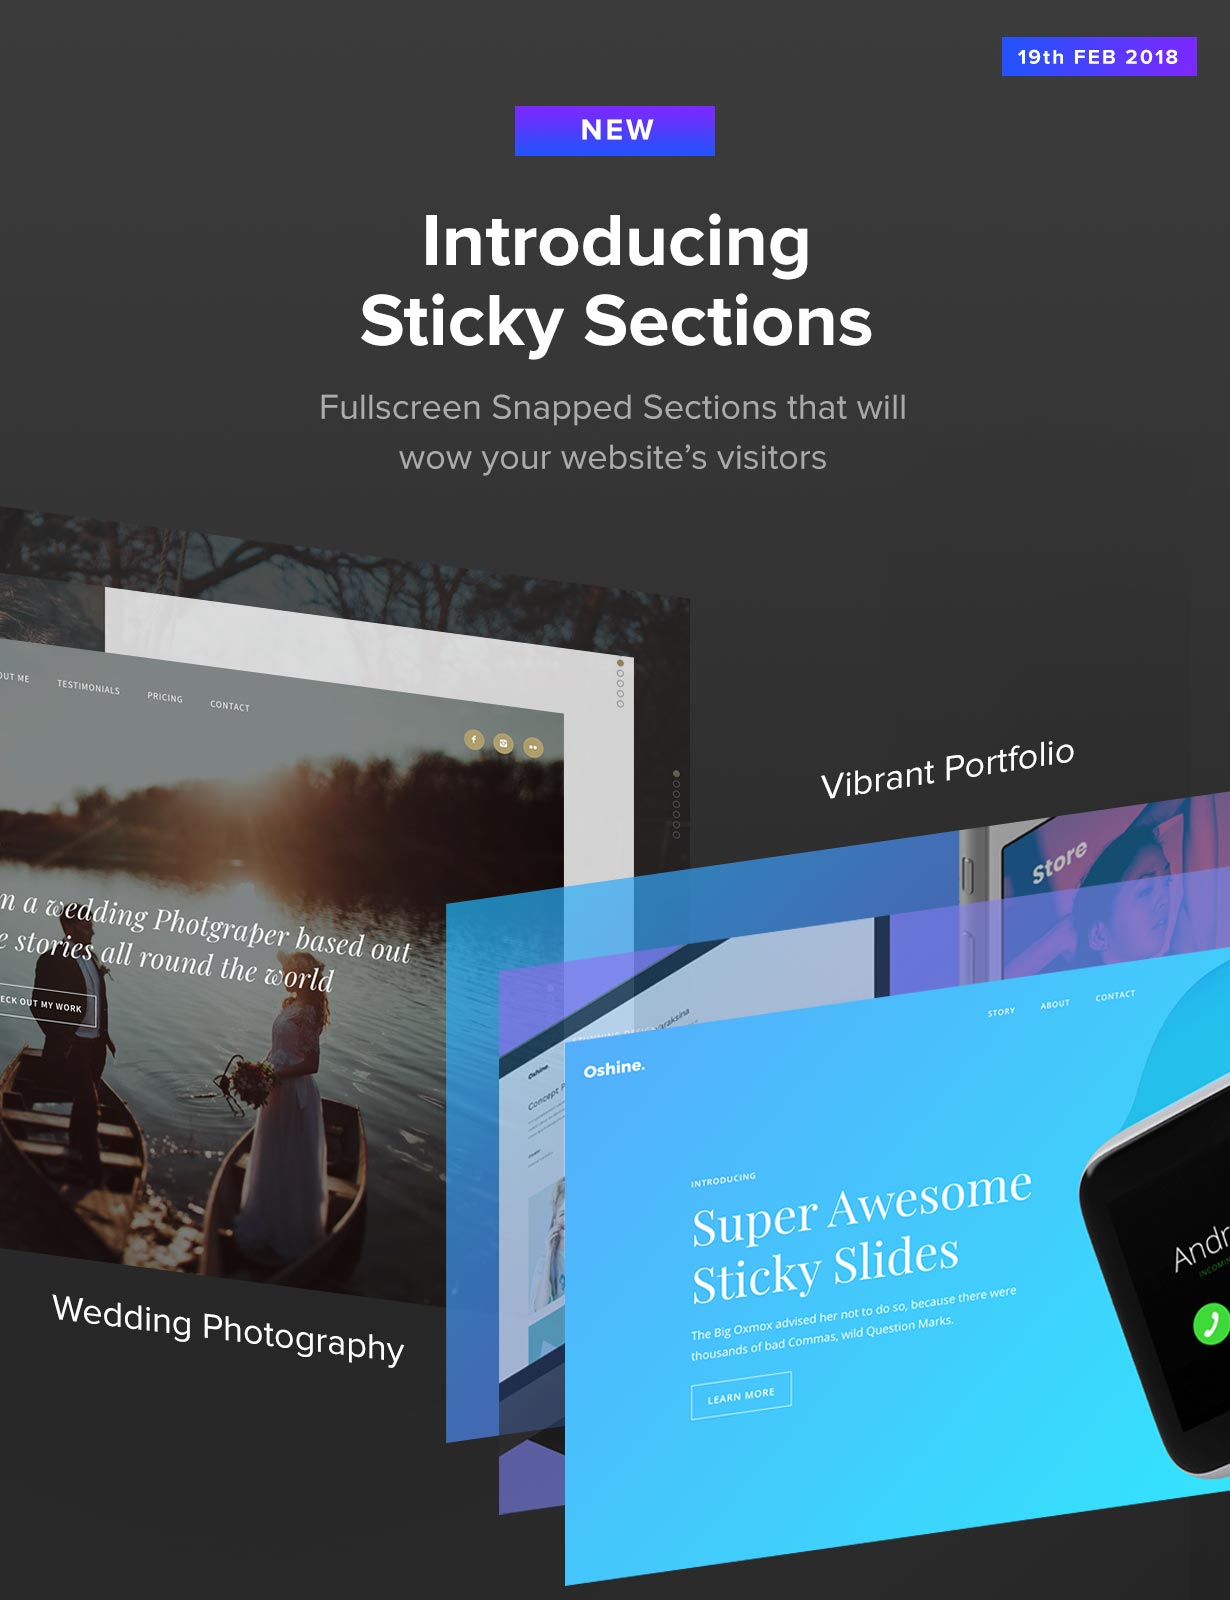 Oshine - Vibrant Portfolio and Wedding Photography Demos featuring the all new sticky sections